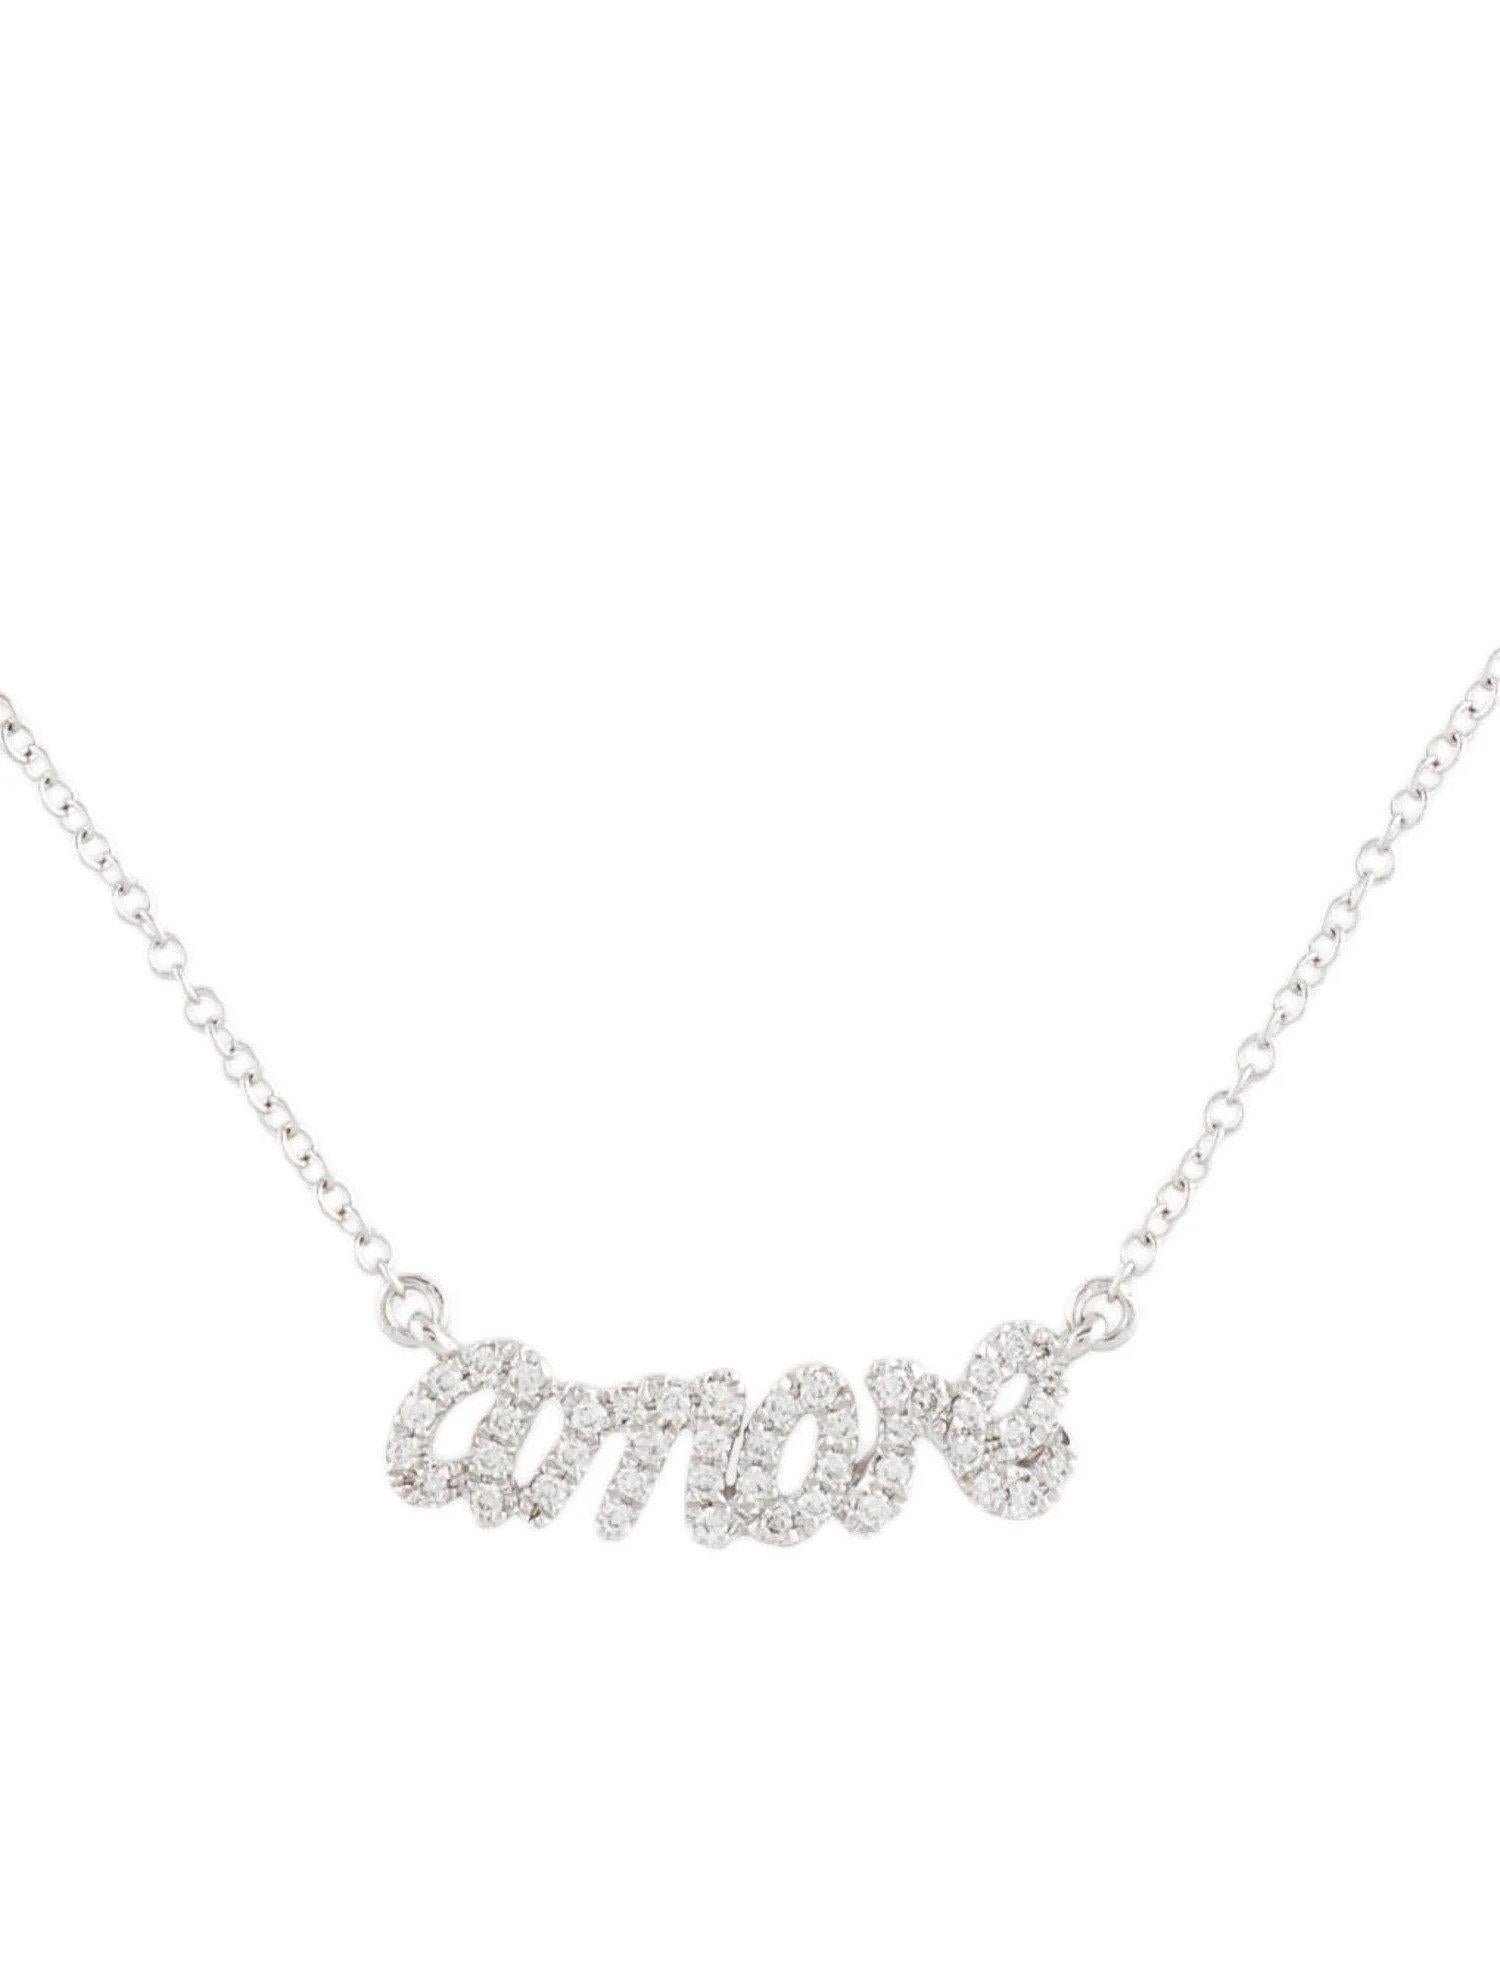 0.12 Carat Diamond Amore White Gold Pendant Necklace In New Condition For Sale In Great Neck, NY